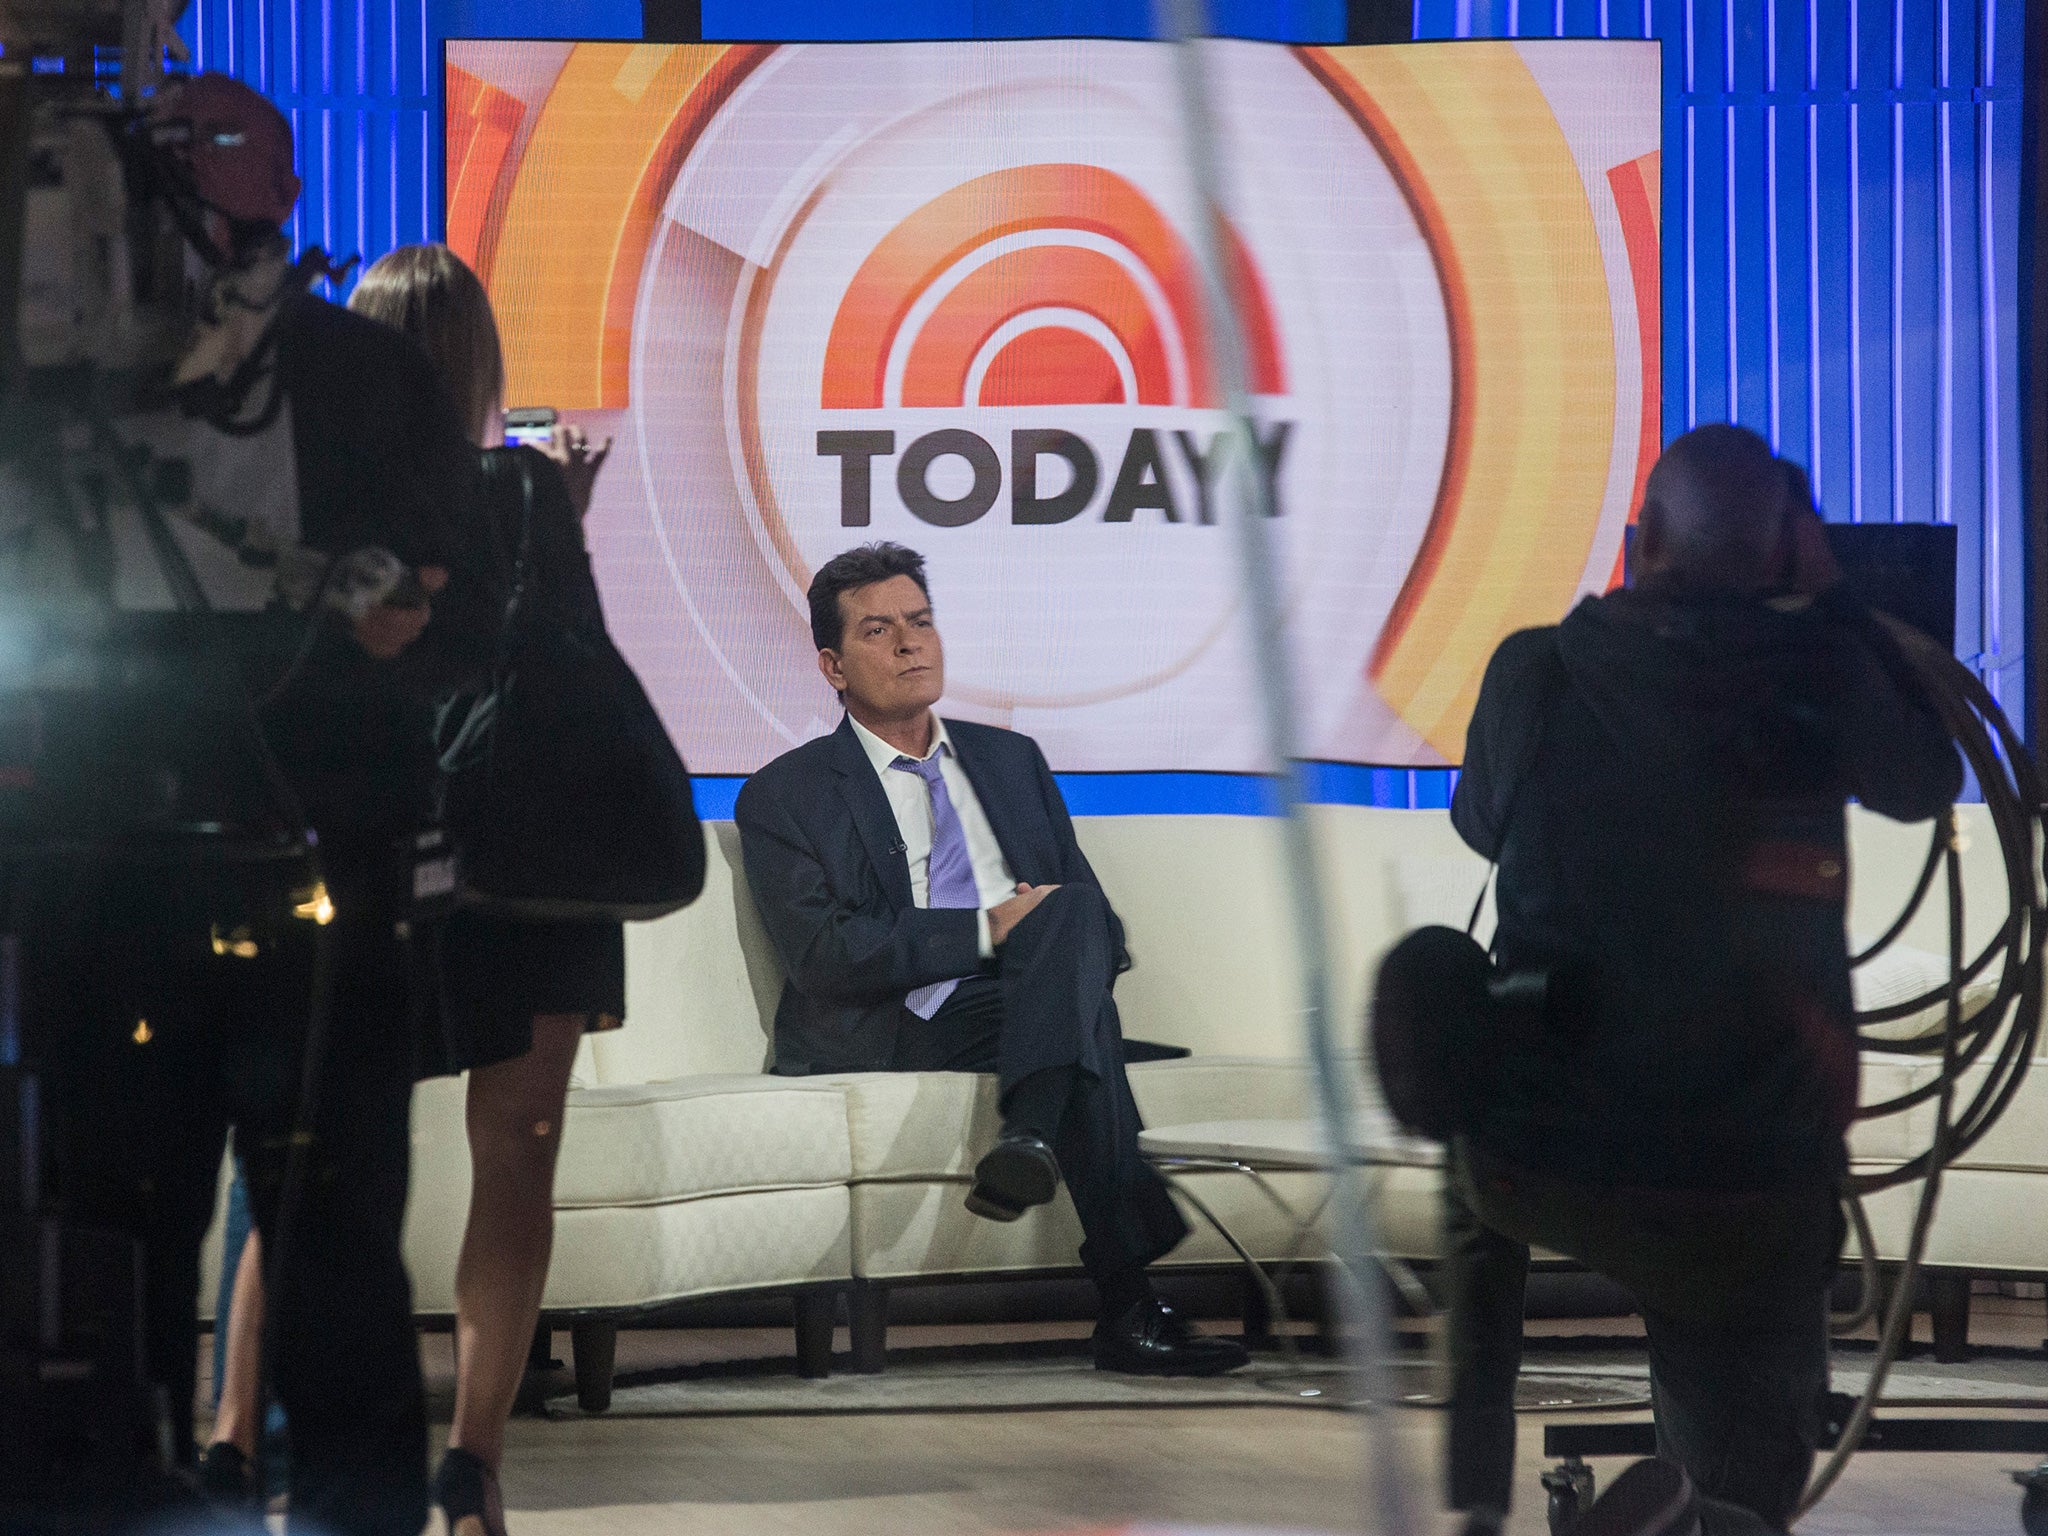 Actor Charlie Sheen waits on the set of the Today Show before formally announcing that he is H.I.V. positive in an interview with Matt Lauer